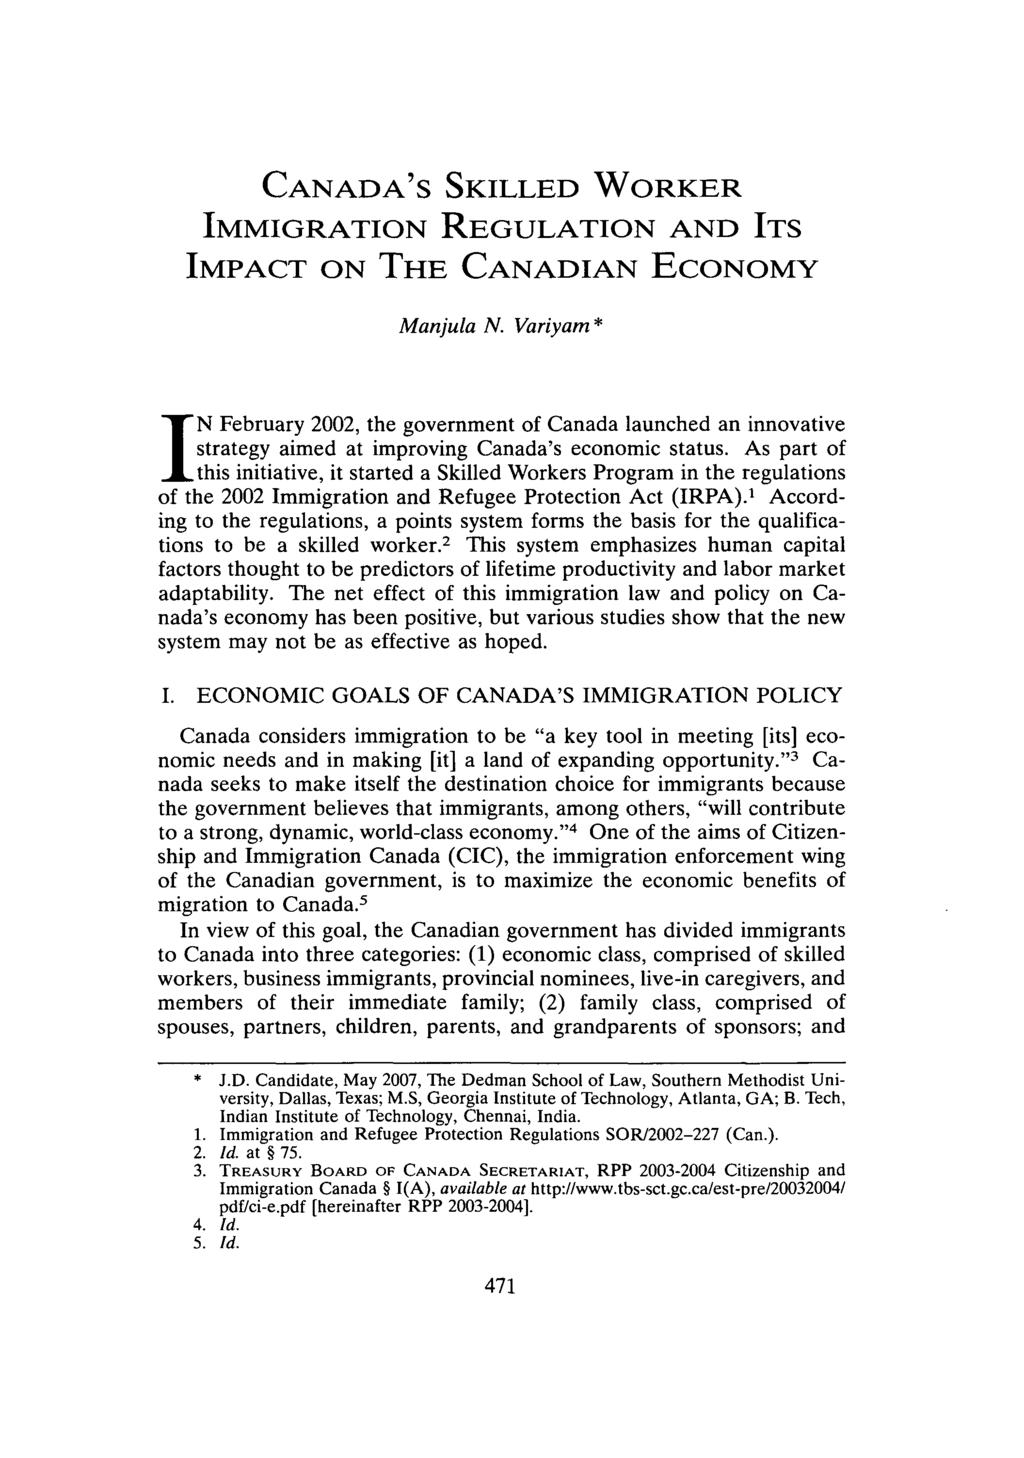 CANADA'S SKILLED WORKER IMMIGRATION REGULATION AND ITS IMPACT ON THE CANADIAN ECONOMY Manjula N.